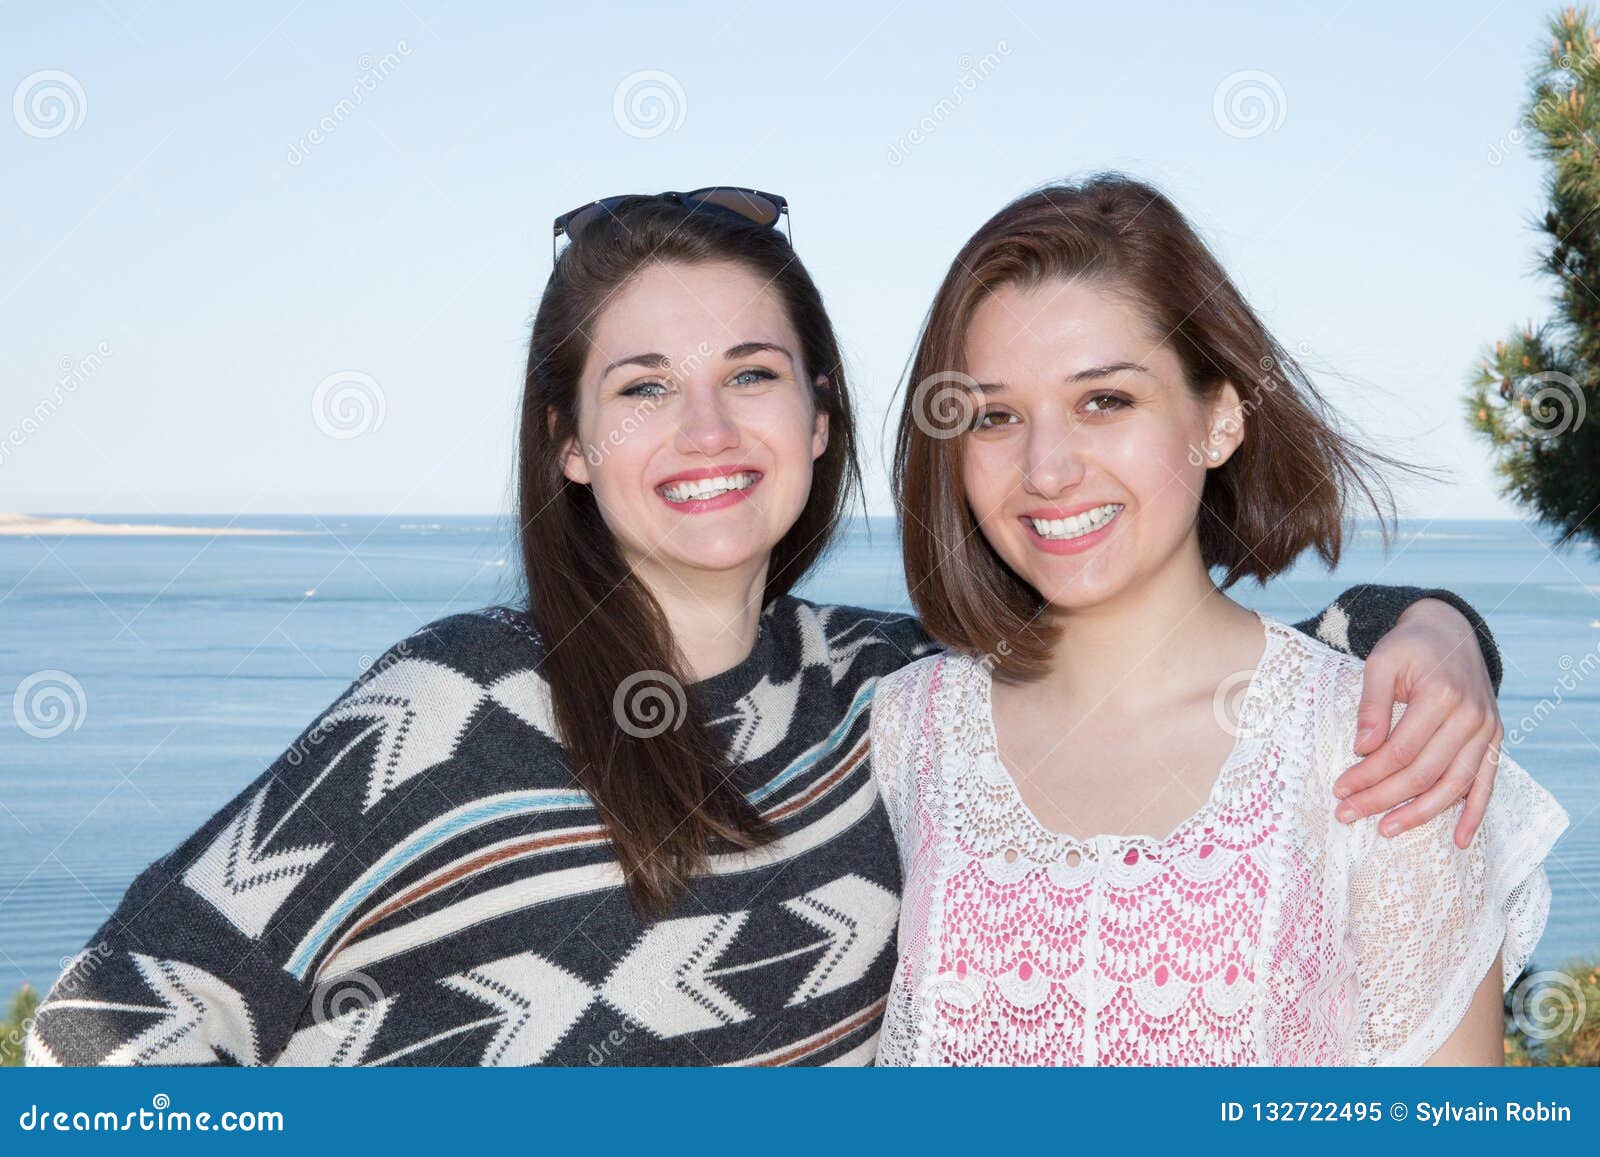 Lesbian Couple Holding Hugging Each Other On The Beach Coast Stock